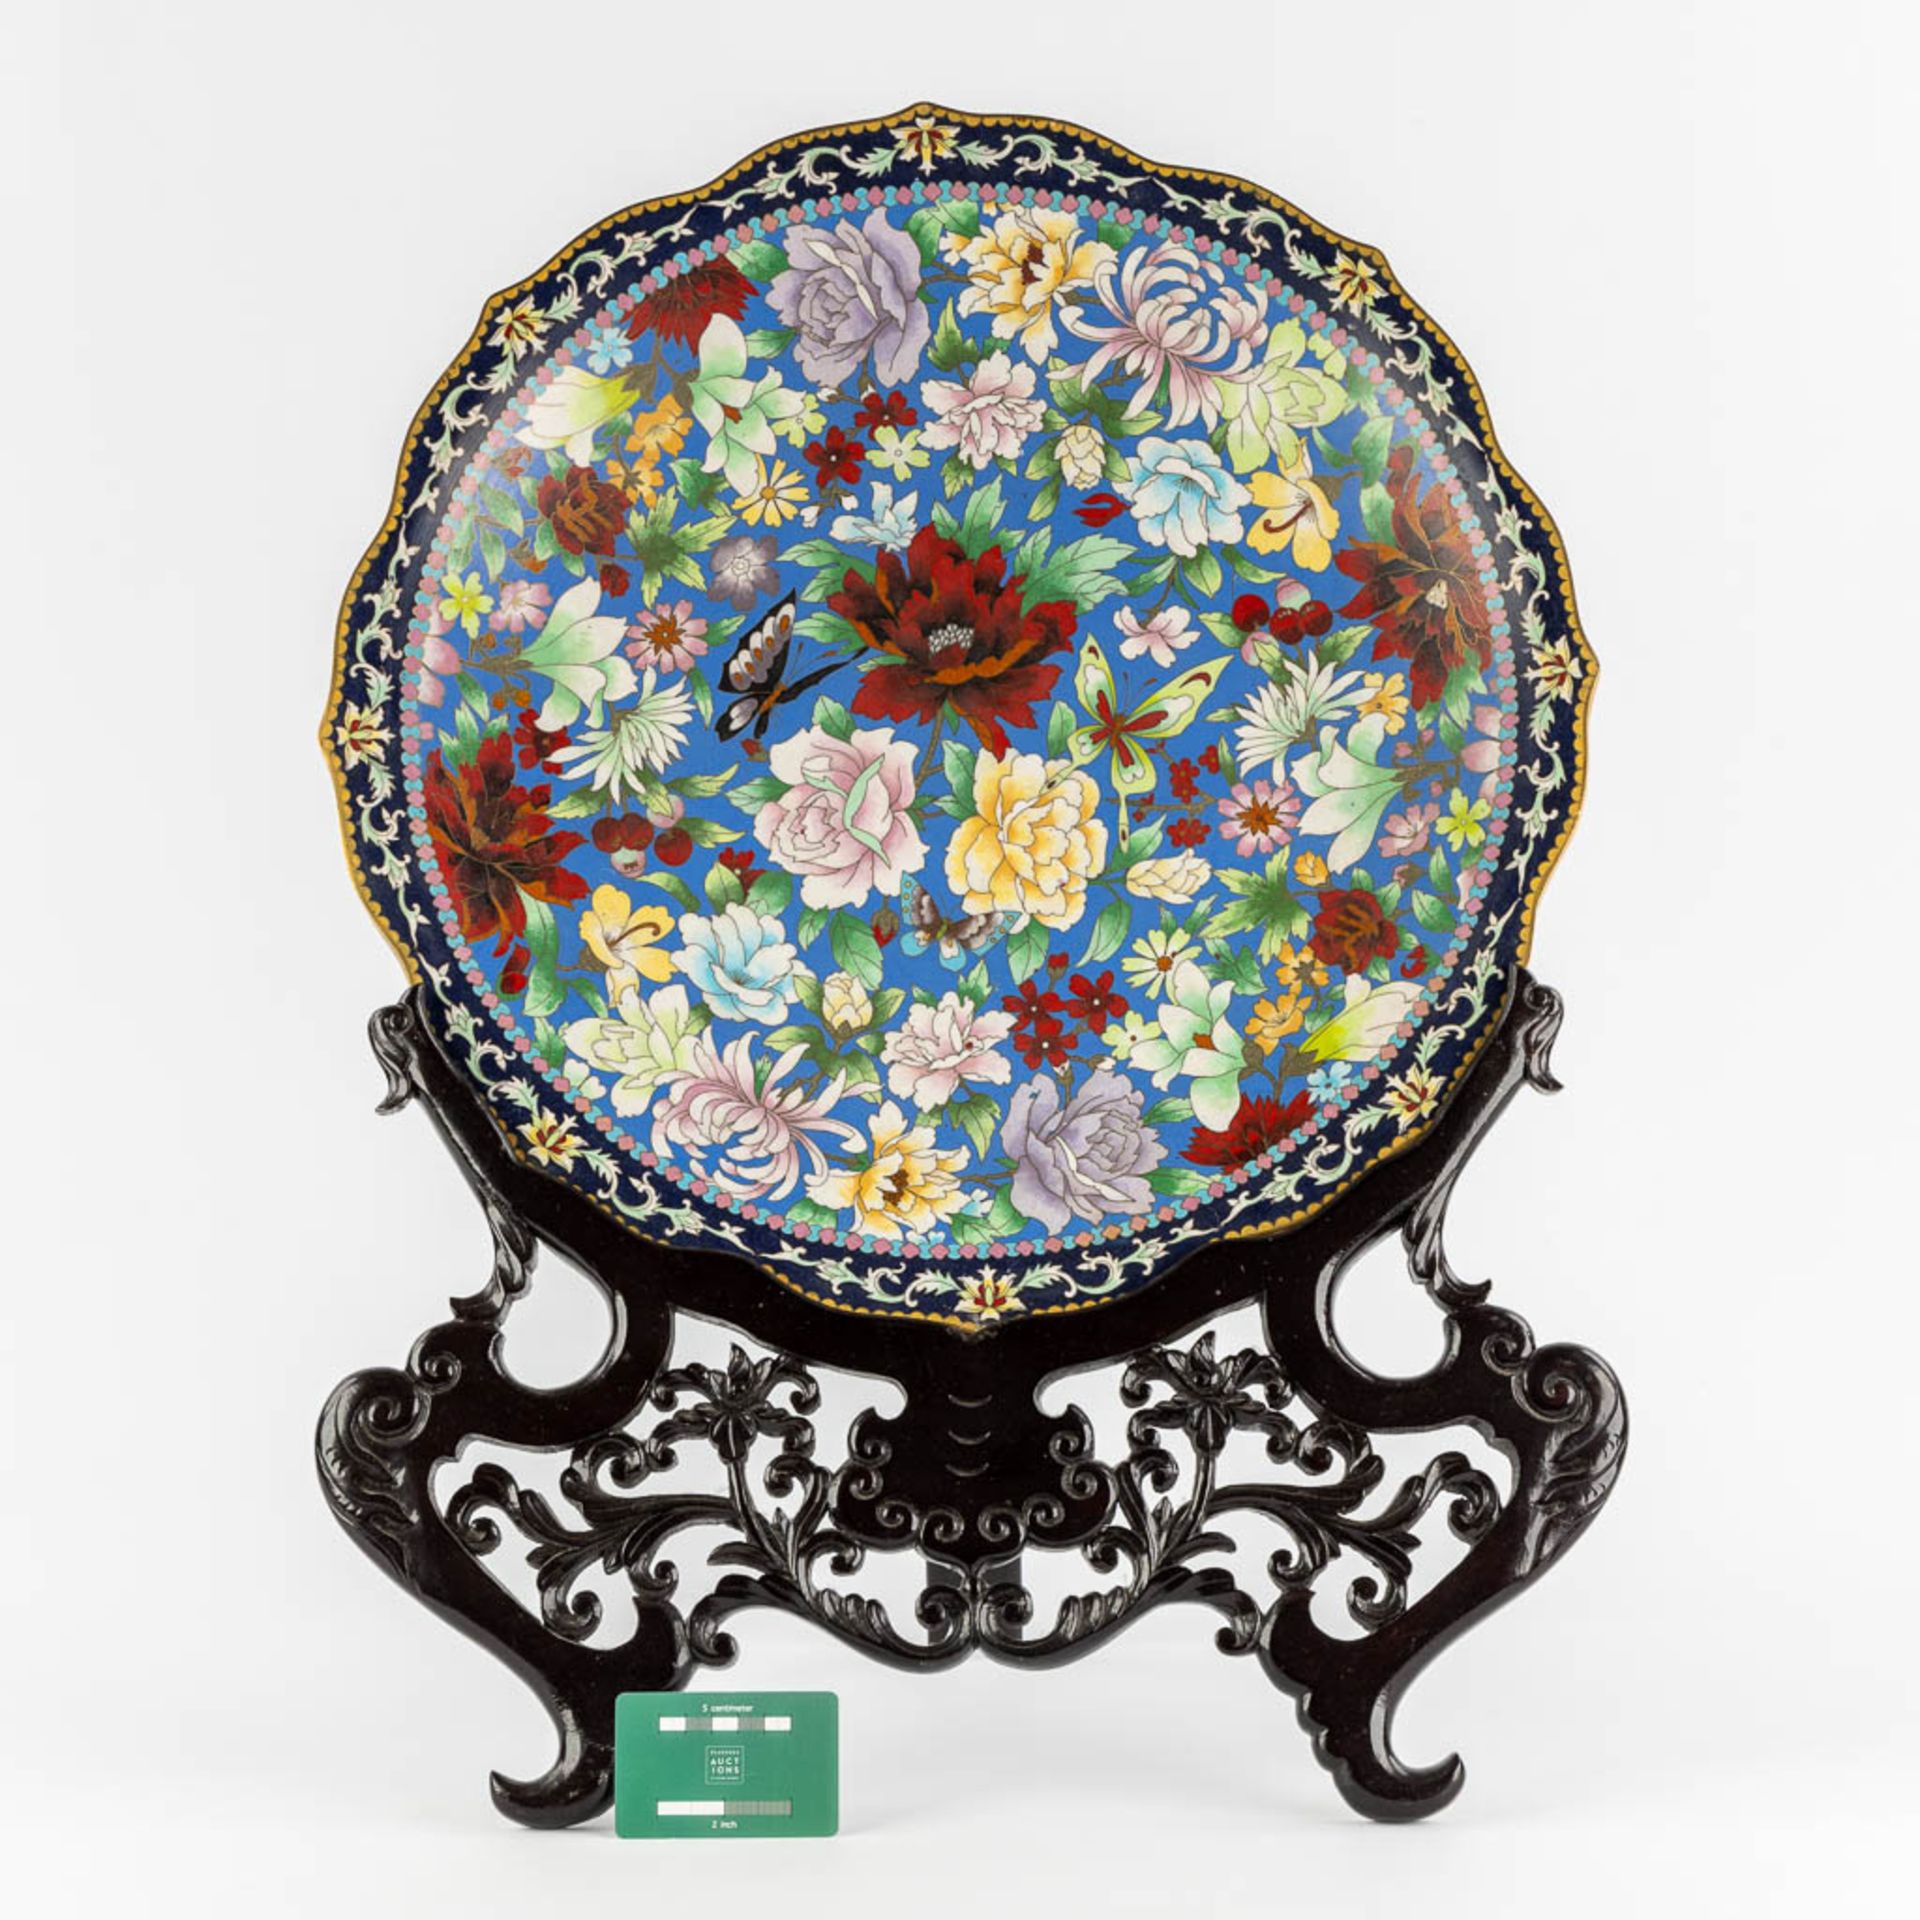 A large Chinese Cloisonné plate in an openworked sculptured wood stand. (W:51 x H:67 cm) - Image 2 of 12